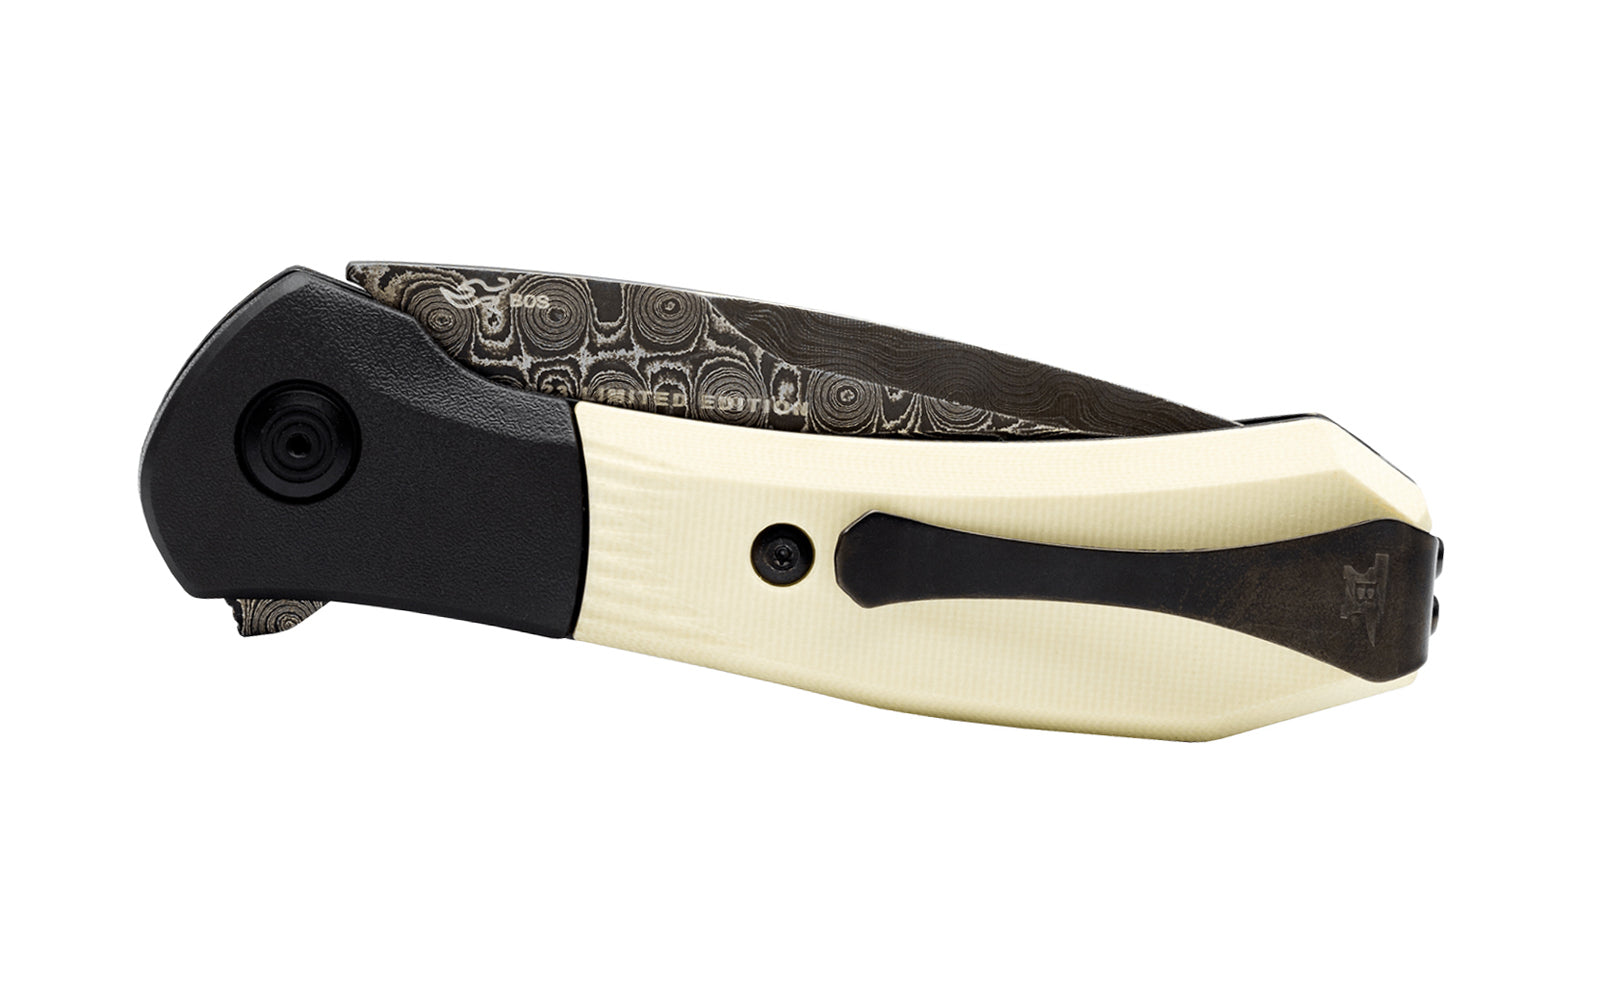 Buck Knives 590 Paradigm Folding Knife with Damascus Steel. Blade has raindrop pattern Damascus steel. 3" long blade. "Ivory G10" handle with DLC coated bolsters. Model 0590IVSLE-B. Pocket clip attached.  Made in USA. 